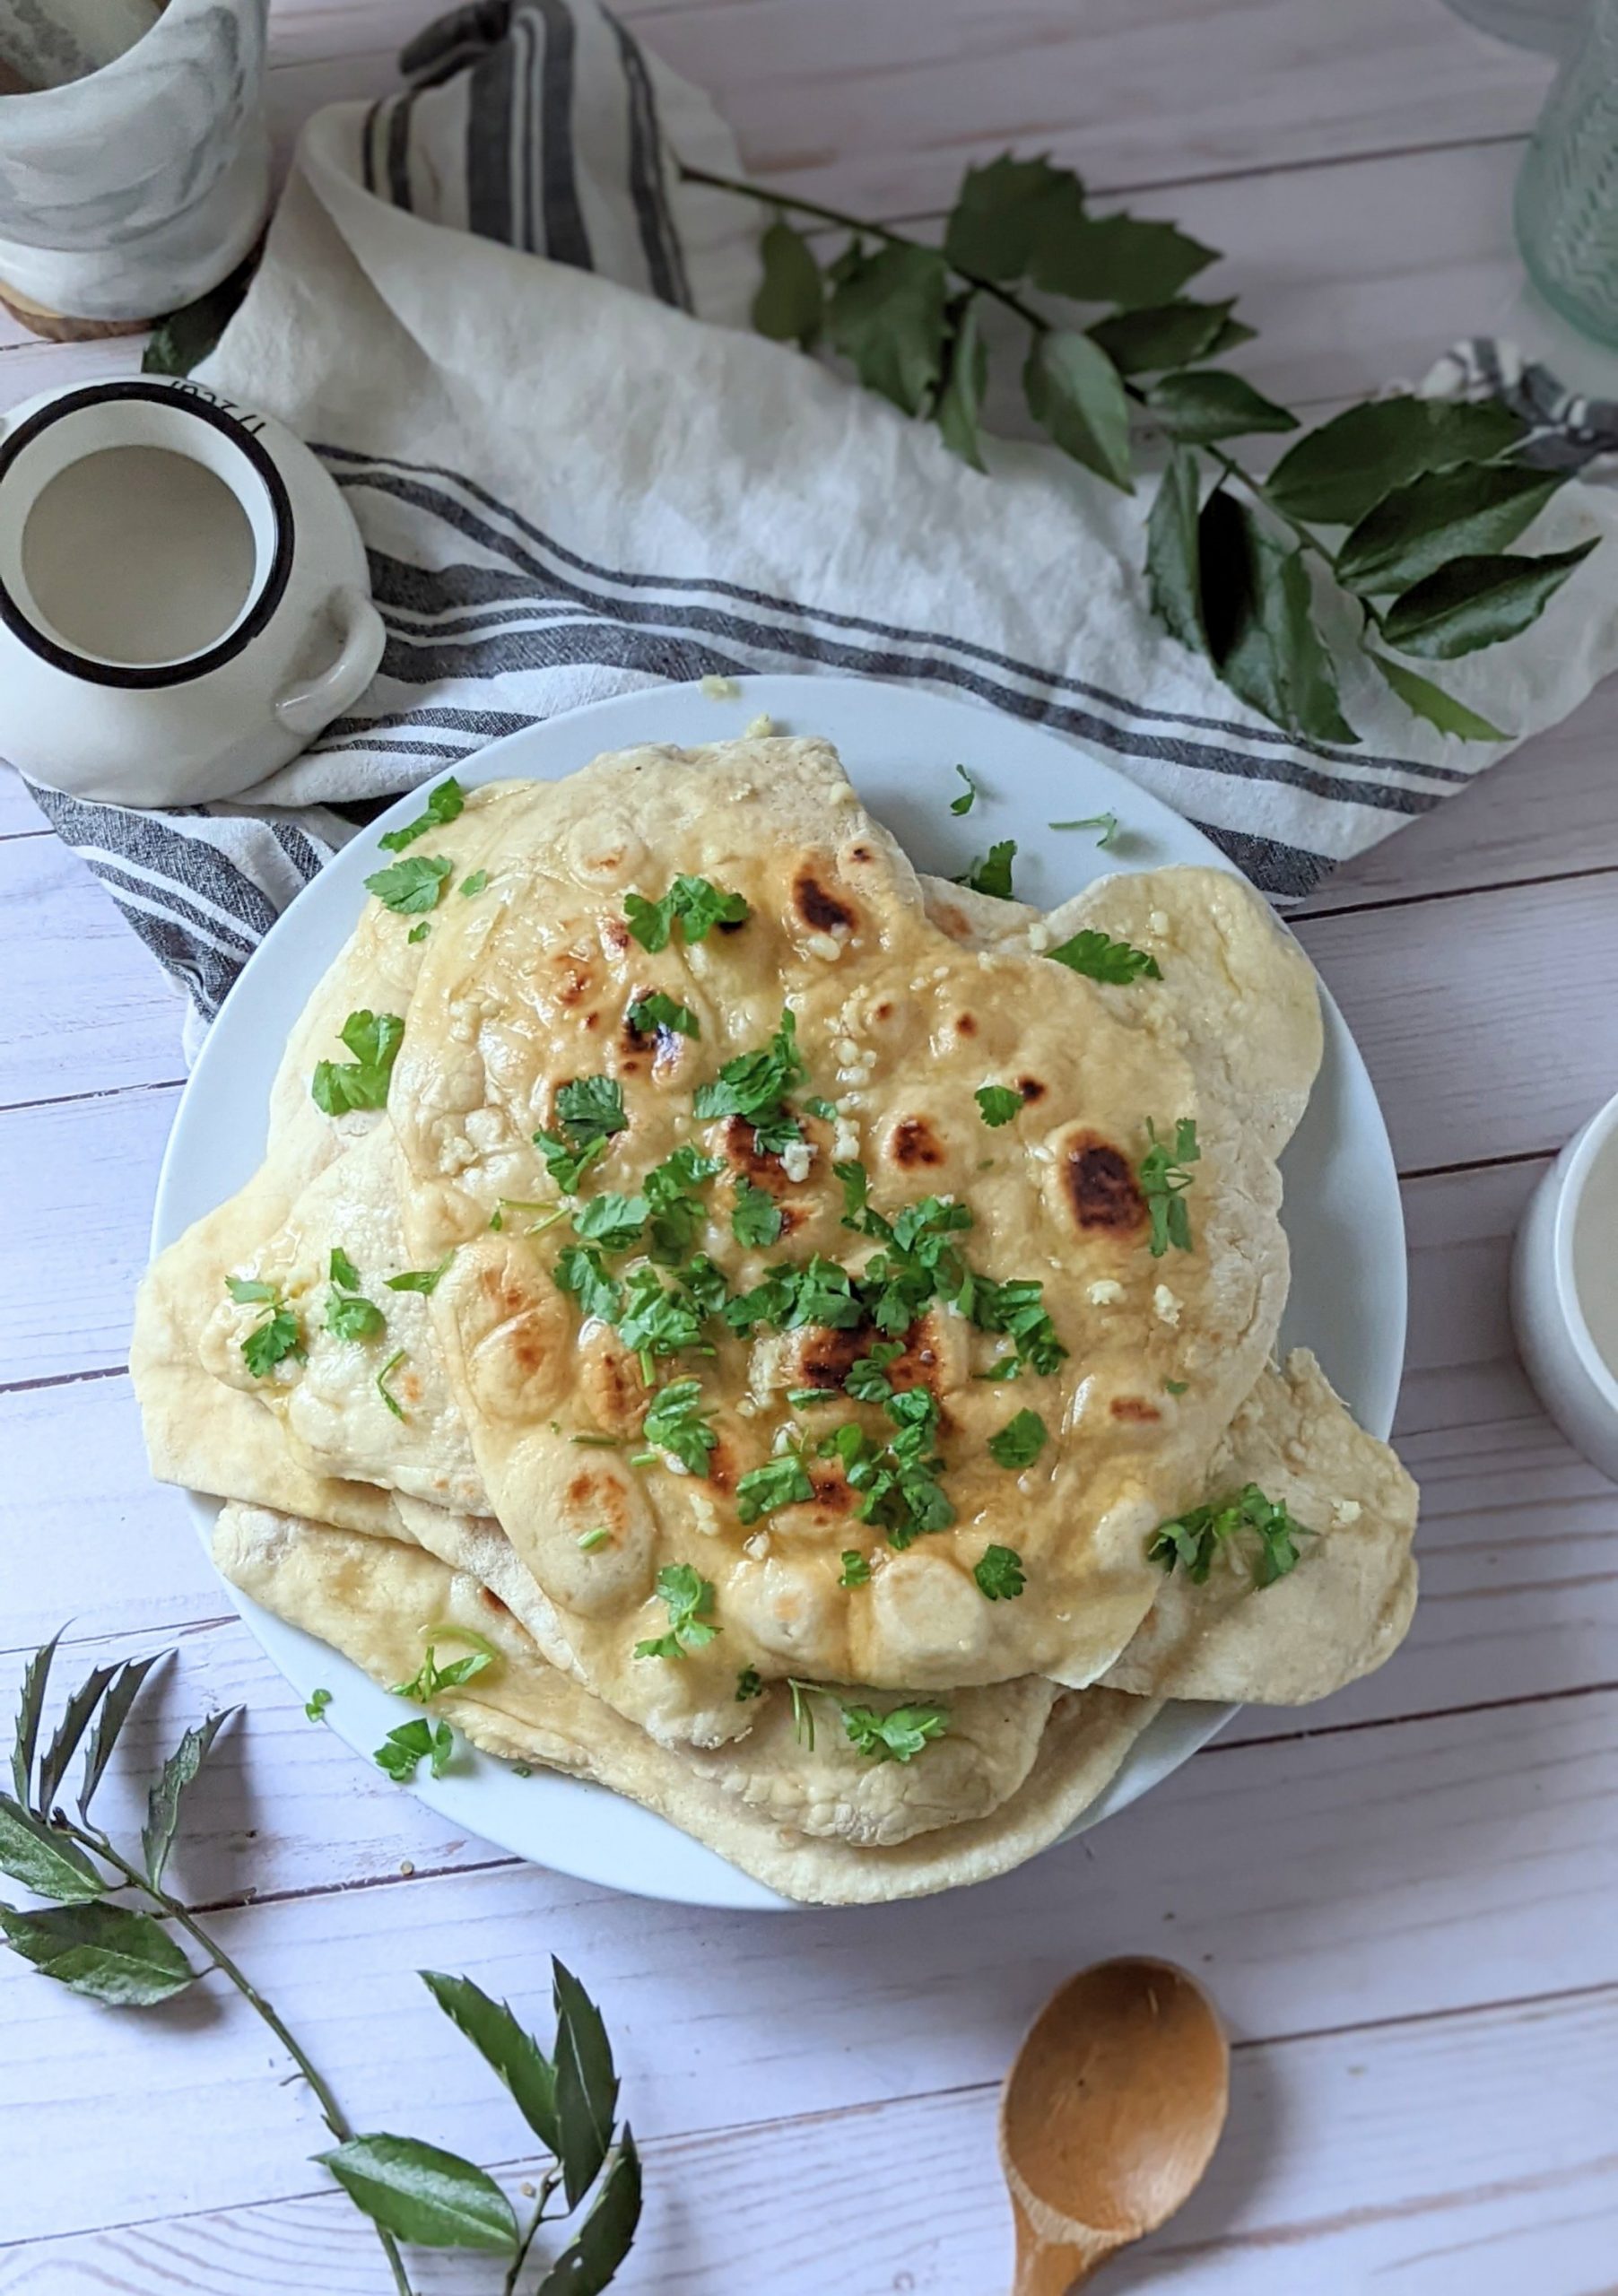 sourdough discard naan recipe with garlic and olive oil and parsley to eat with indian food side dishes dosa naan bread reacipe easy homemade naan with sourdough starter